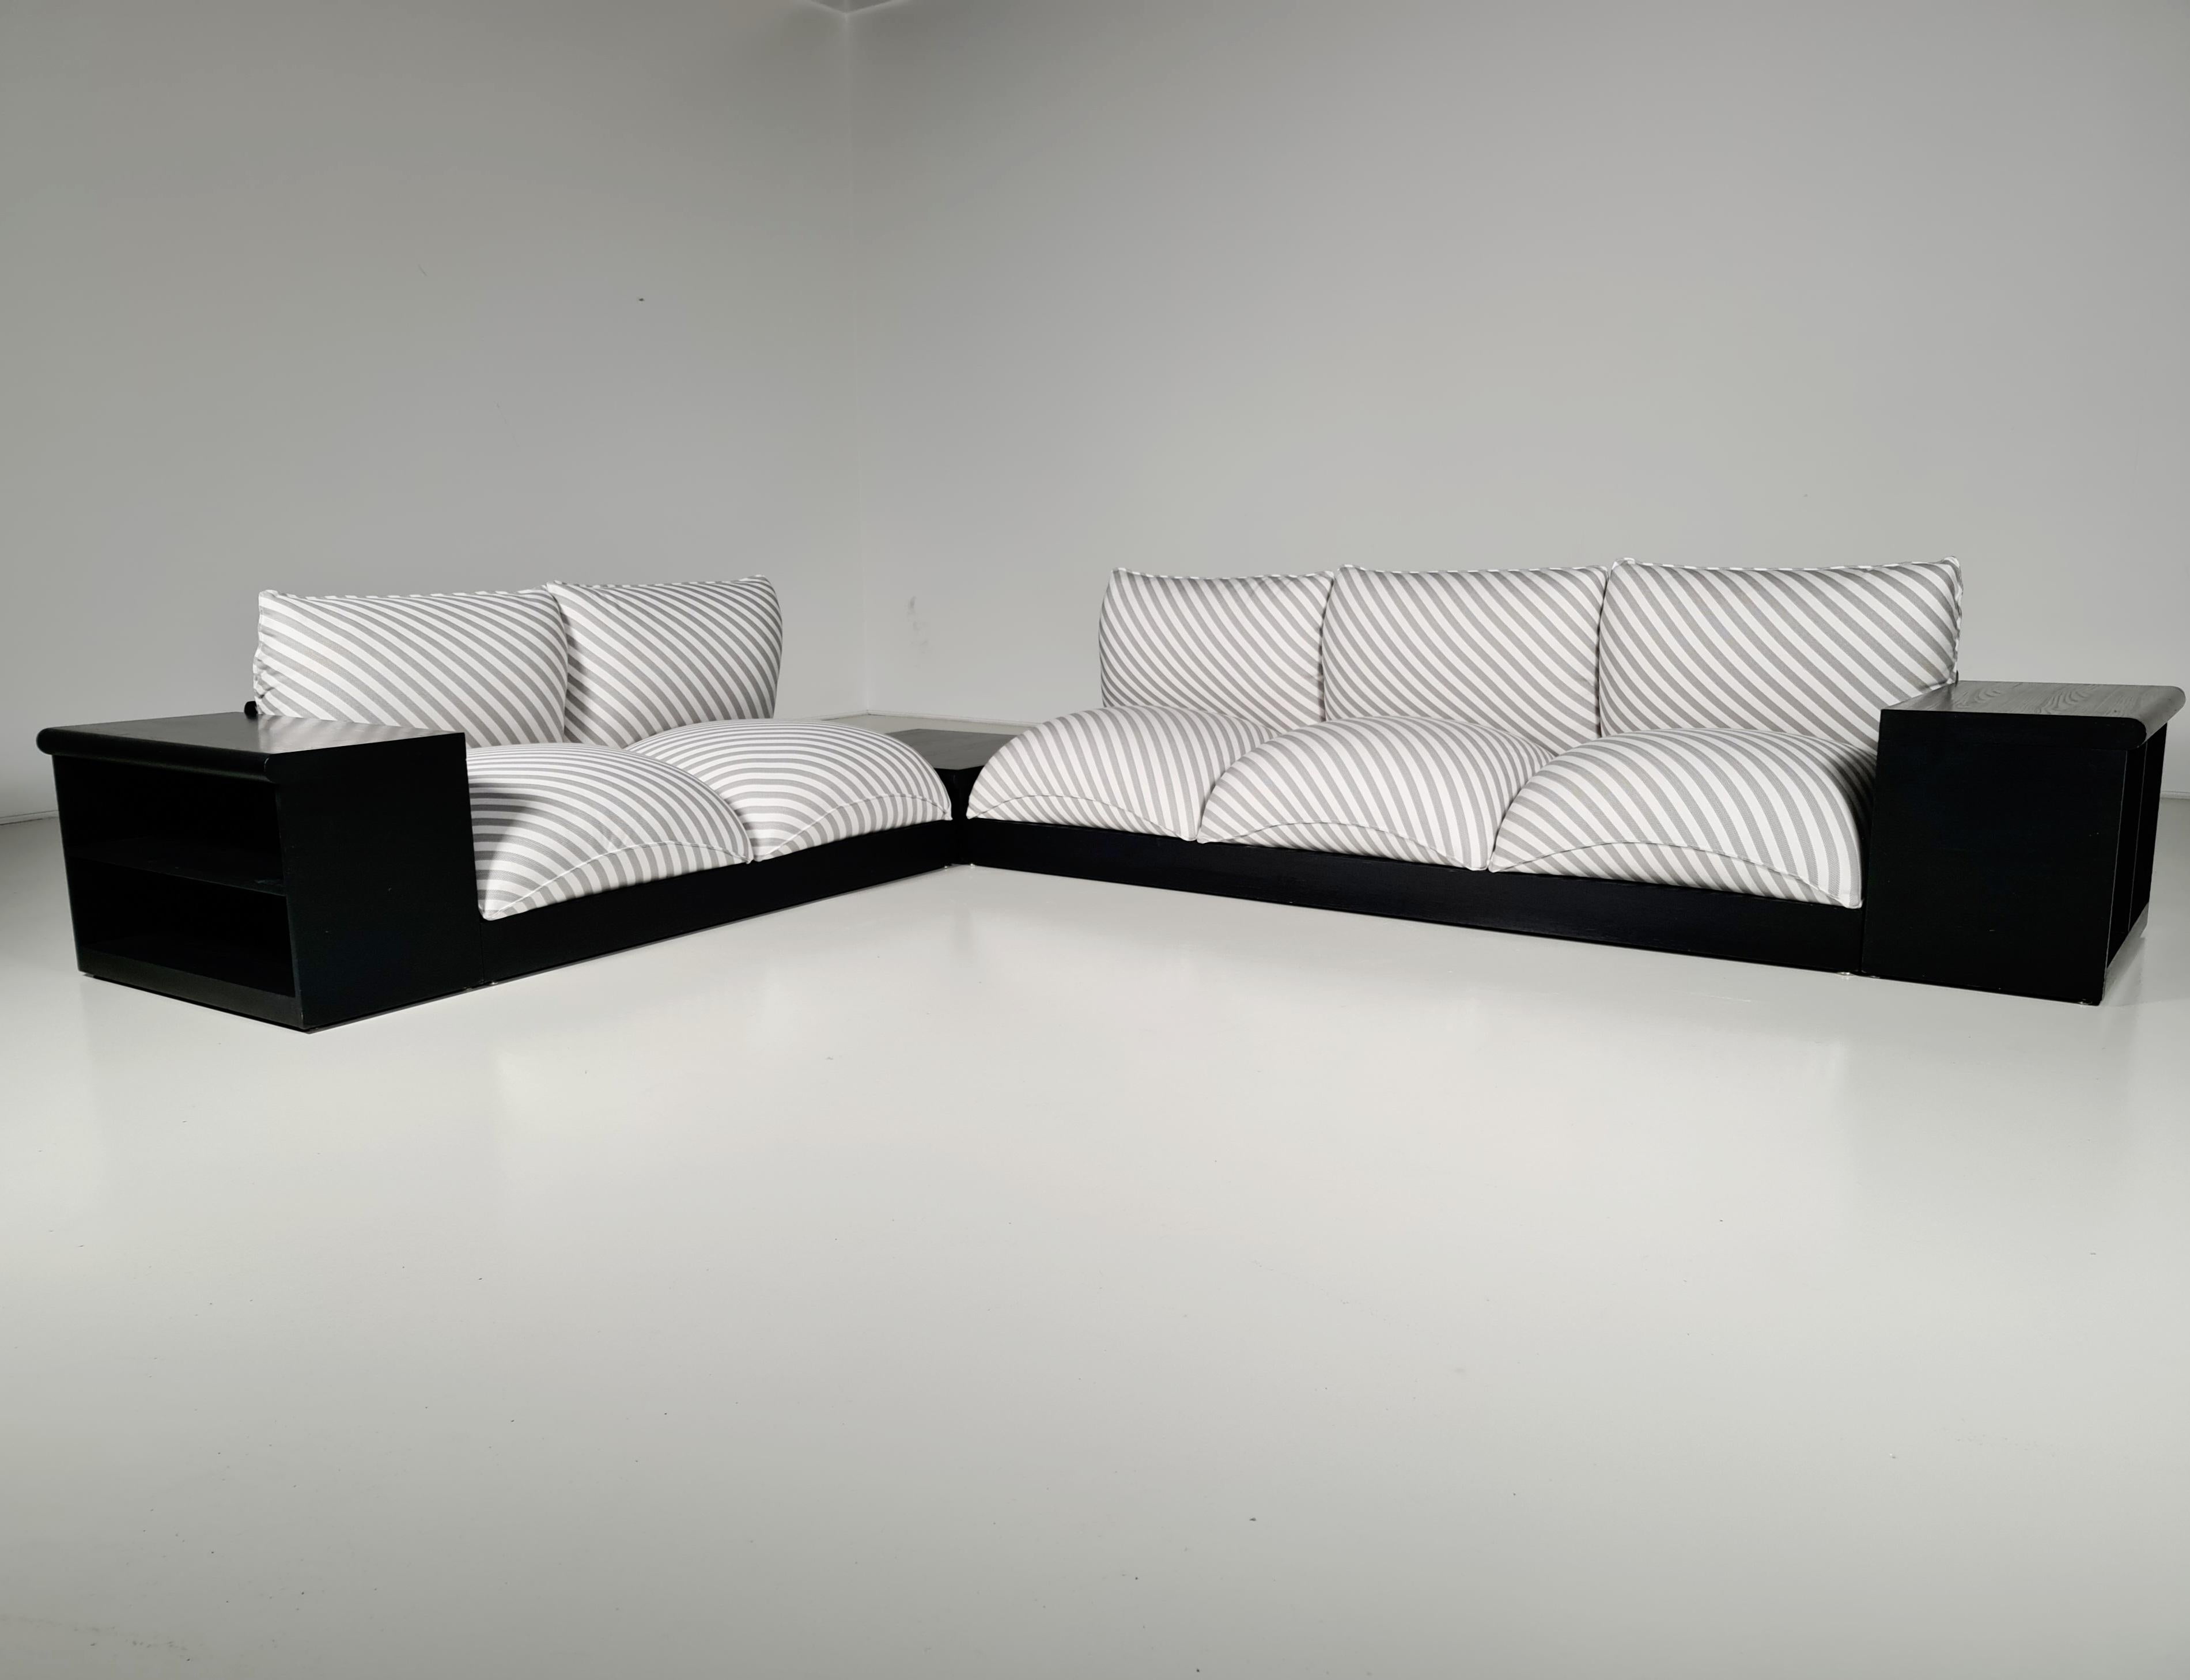 Carlo Bartoli Down (Blob) sofa set, 1970s, Italy.

The most amazing seating set is in excellent original condition. Reupholstered in a fantastic striped grey and white fabric. The base is made from black wood. The seats are firm and are filled